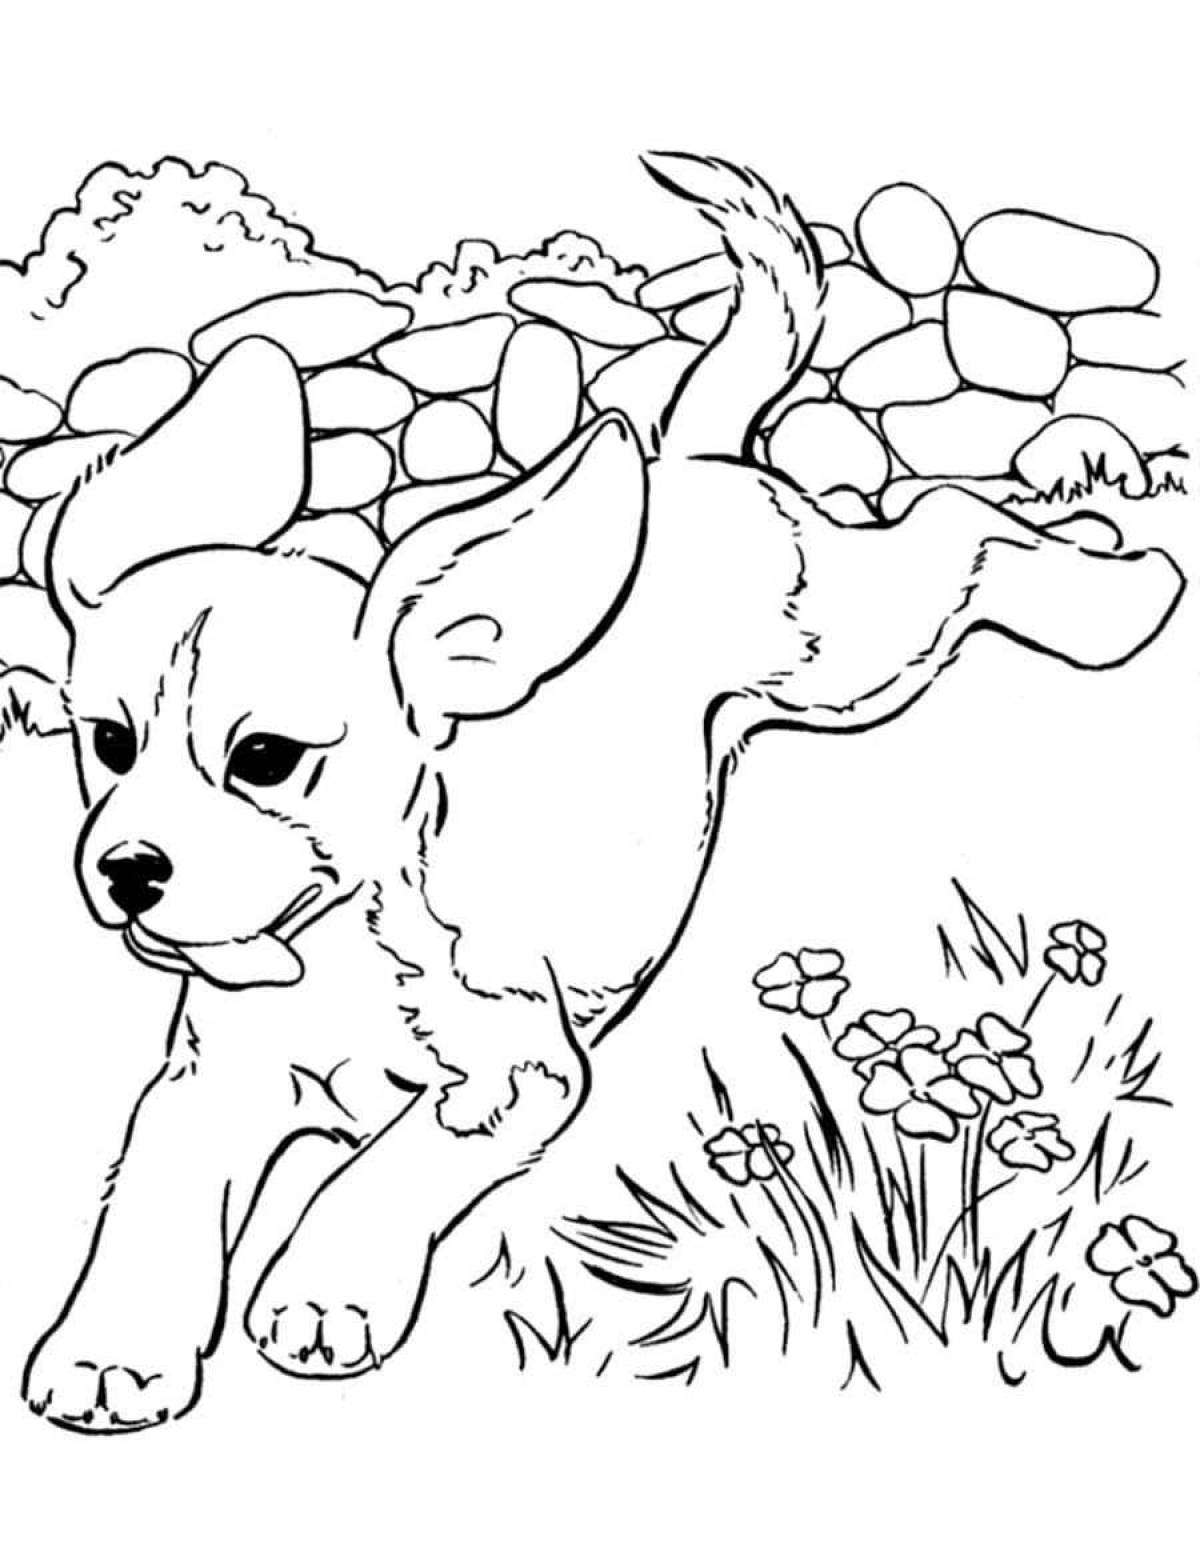 Curiously cute puppy coloring pages